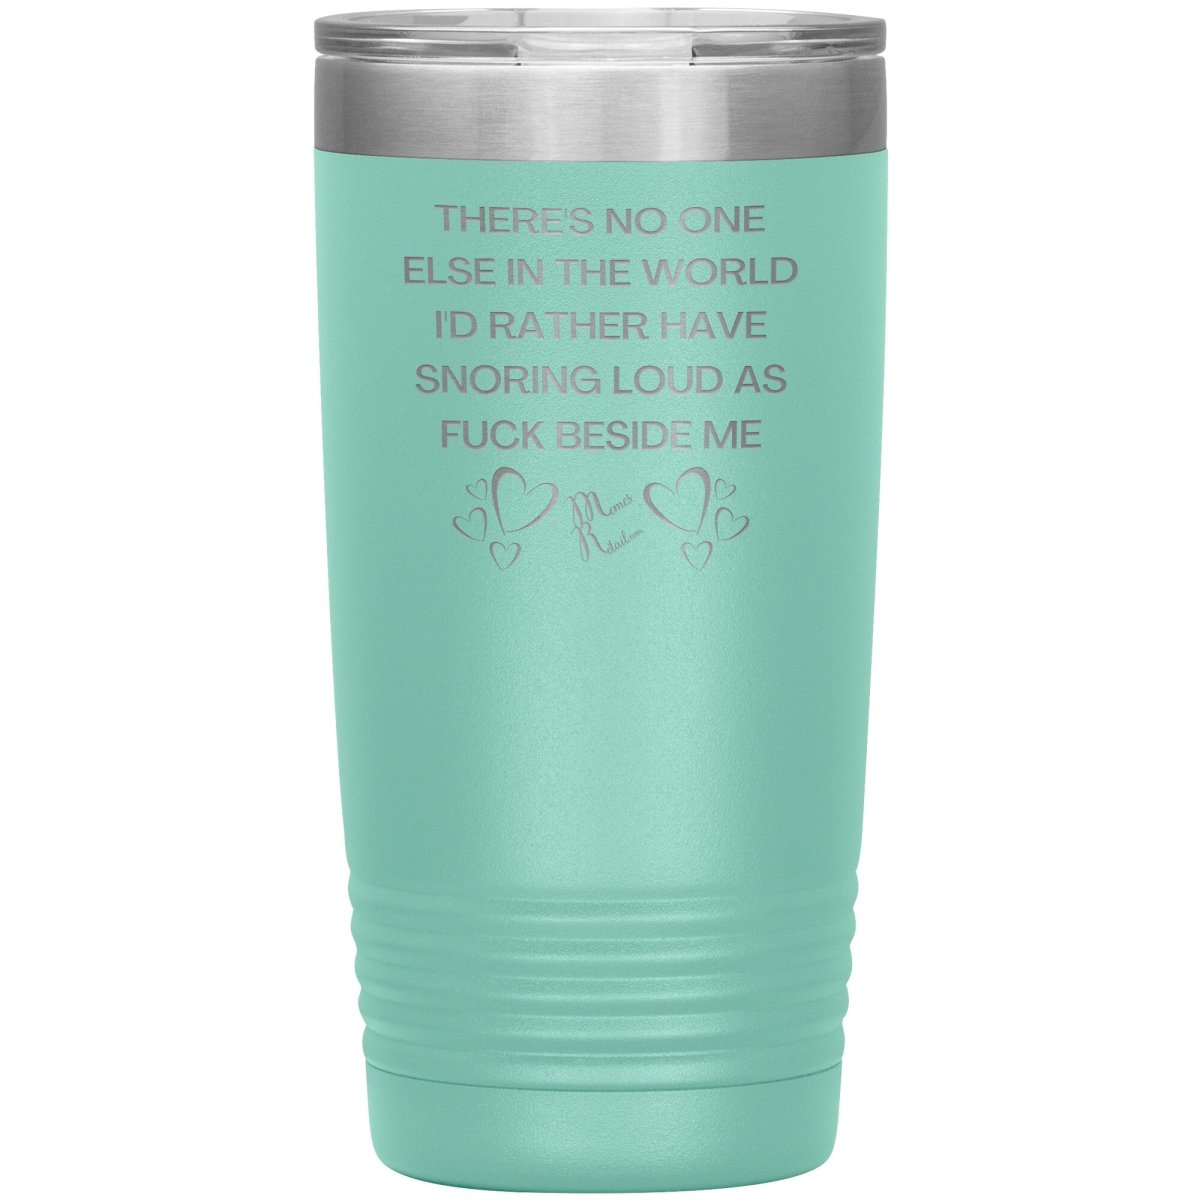 There's No One Else in the World I'd Rather Have Snoring Loud, 20oz Insulated Tumbler / Teal - MemesRetail.com